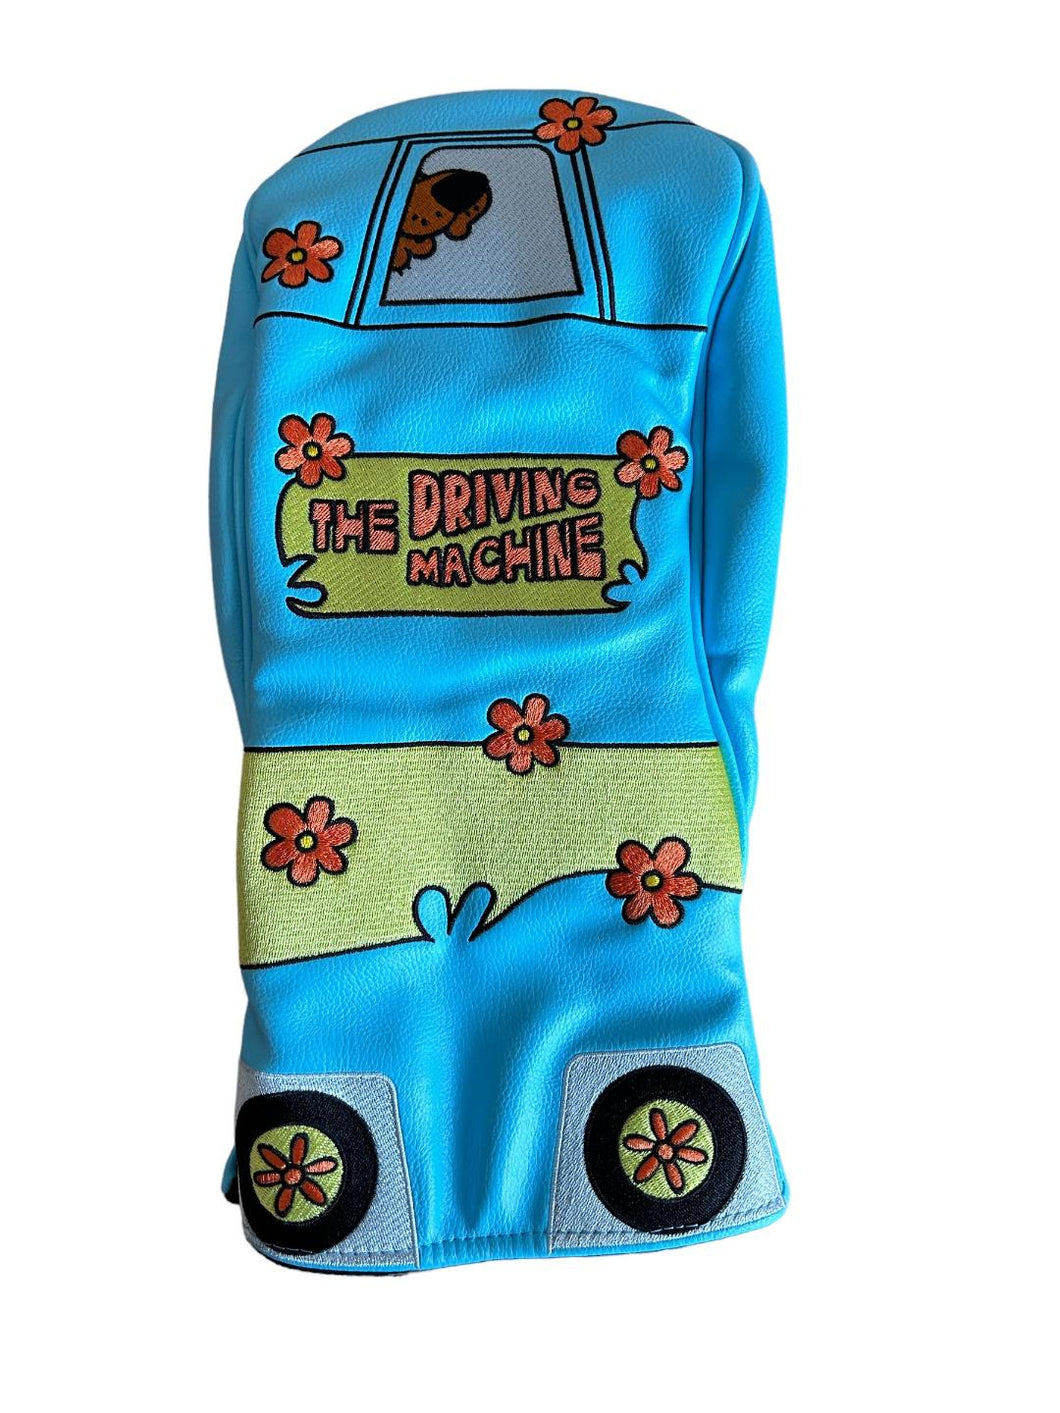 PRG Originals Driving / Putting Machine  Design Golf Headcovers. Set of 3. Driver, Fairway and Rescue or Putter Cover.